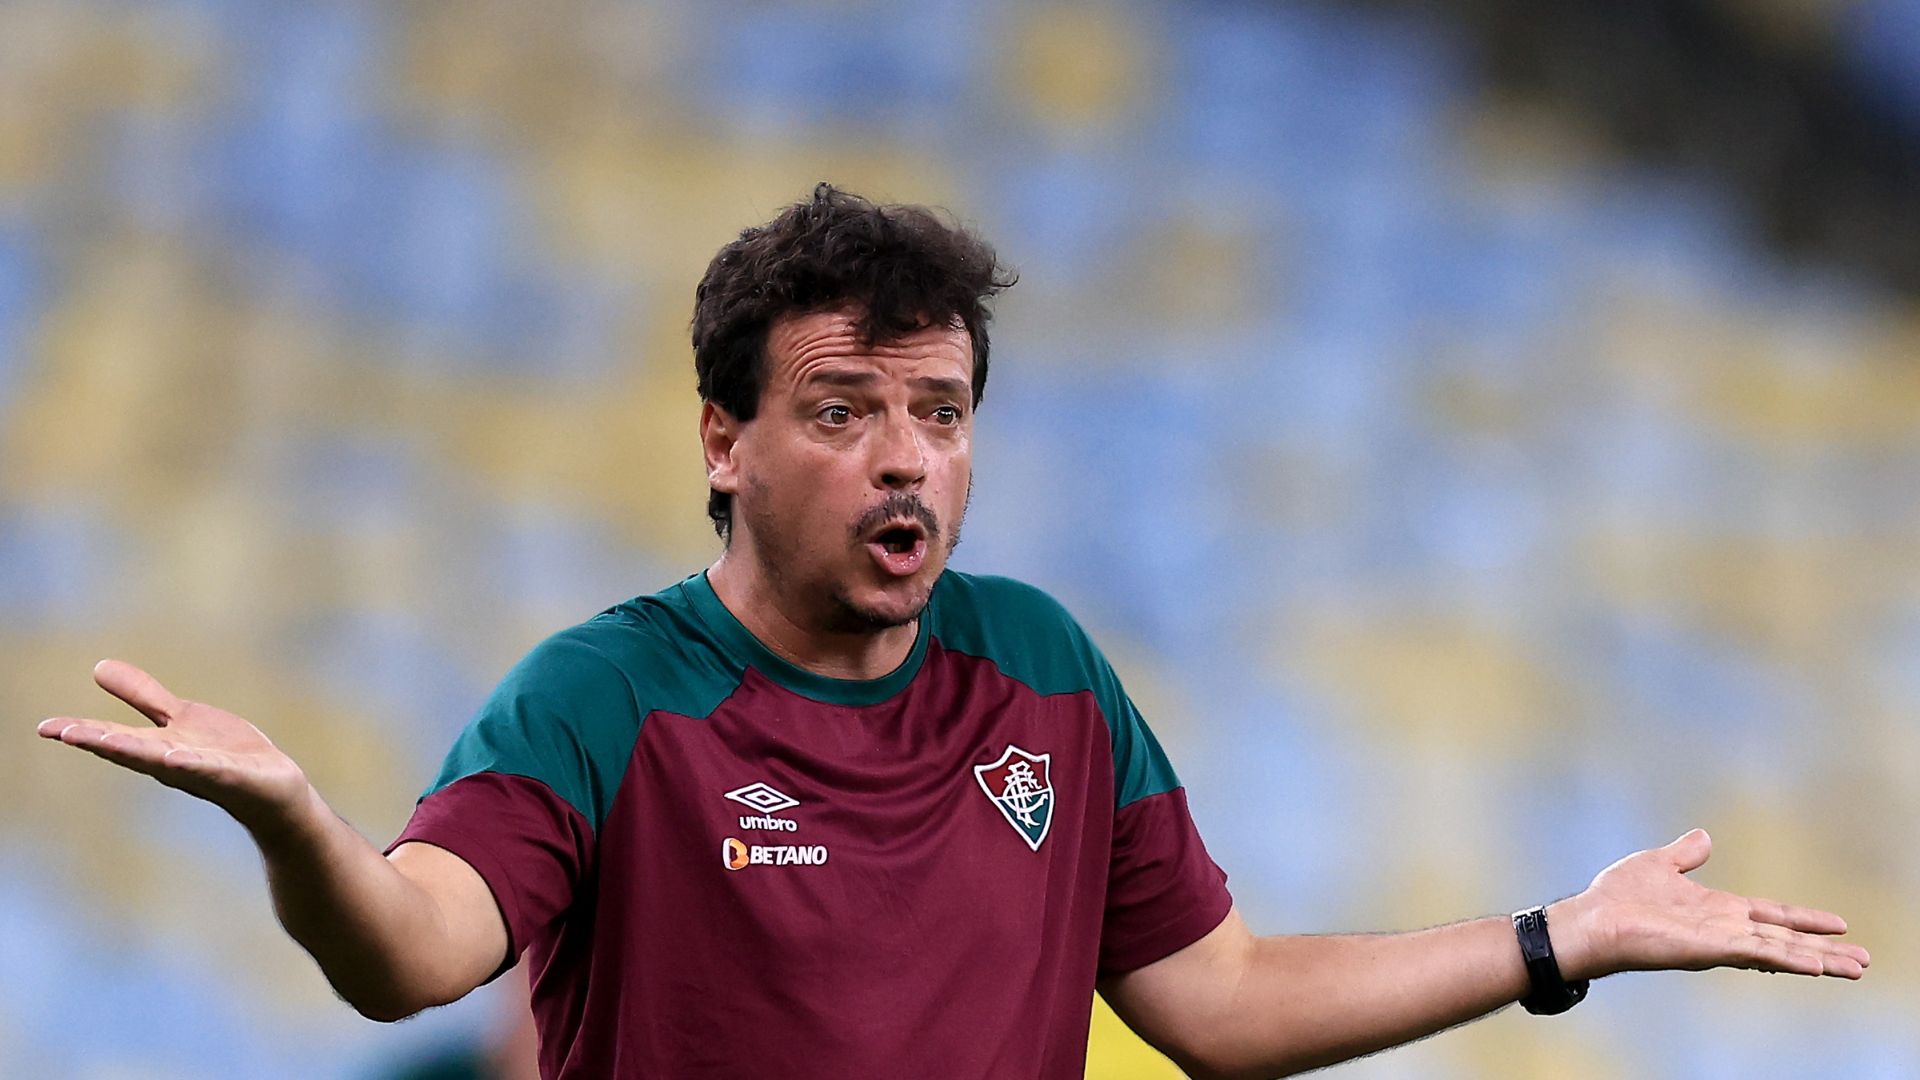 Fernando Diniz's reactions during the match against Vasco (Credit: Getty Images)